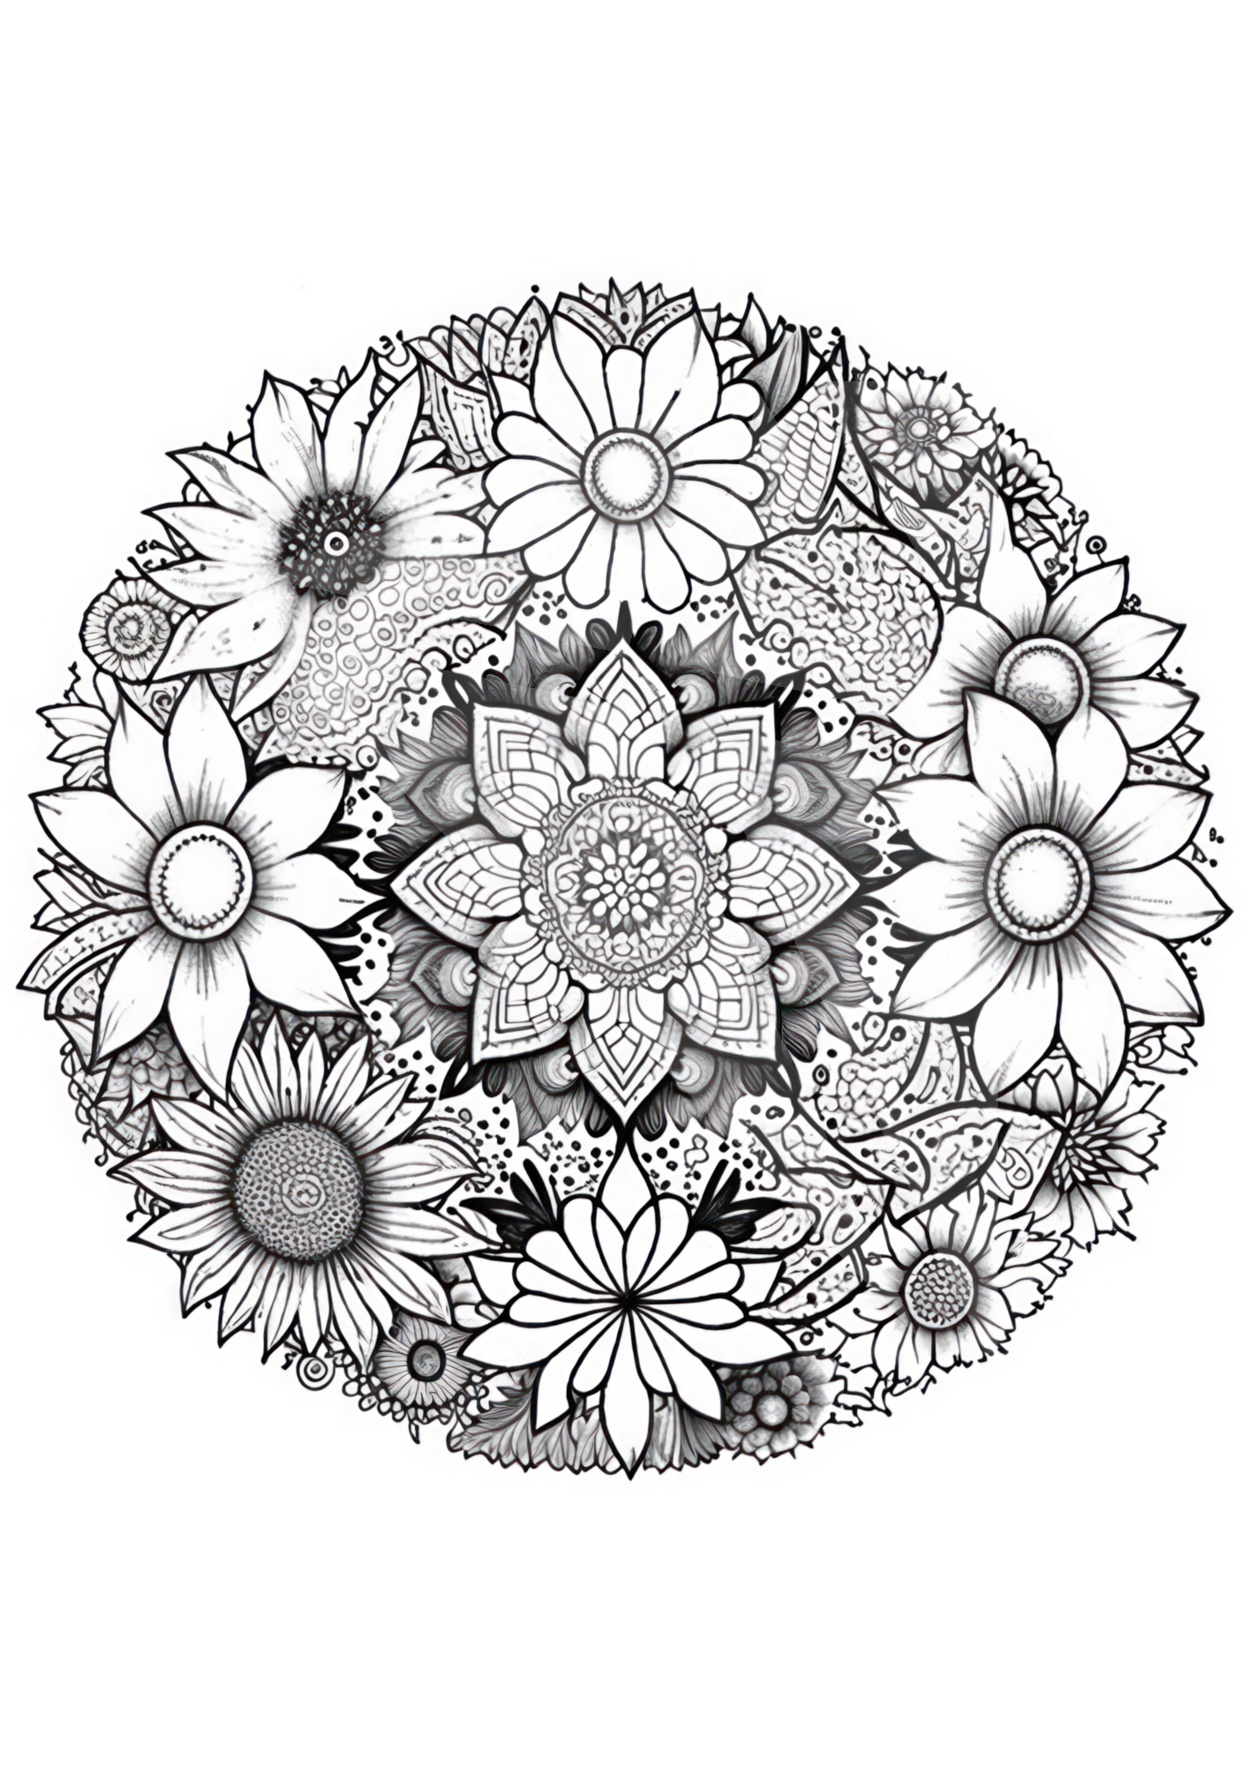 Mesmerizing mandala coloring pages for kids and adults